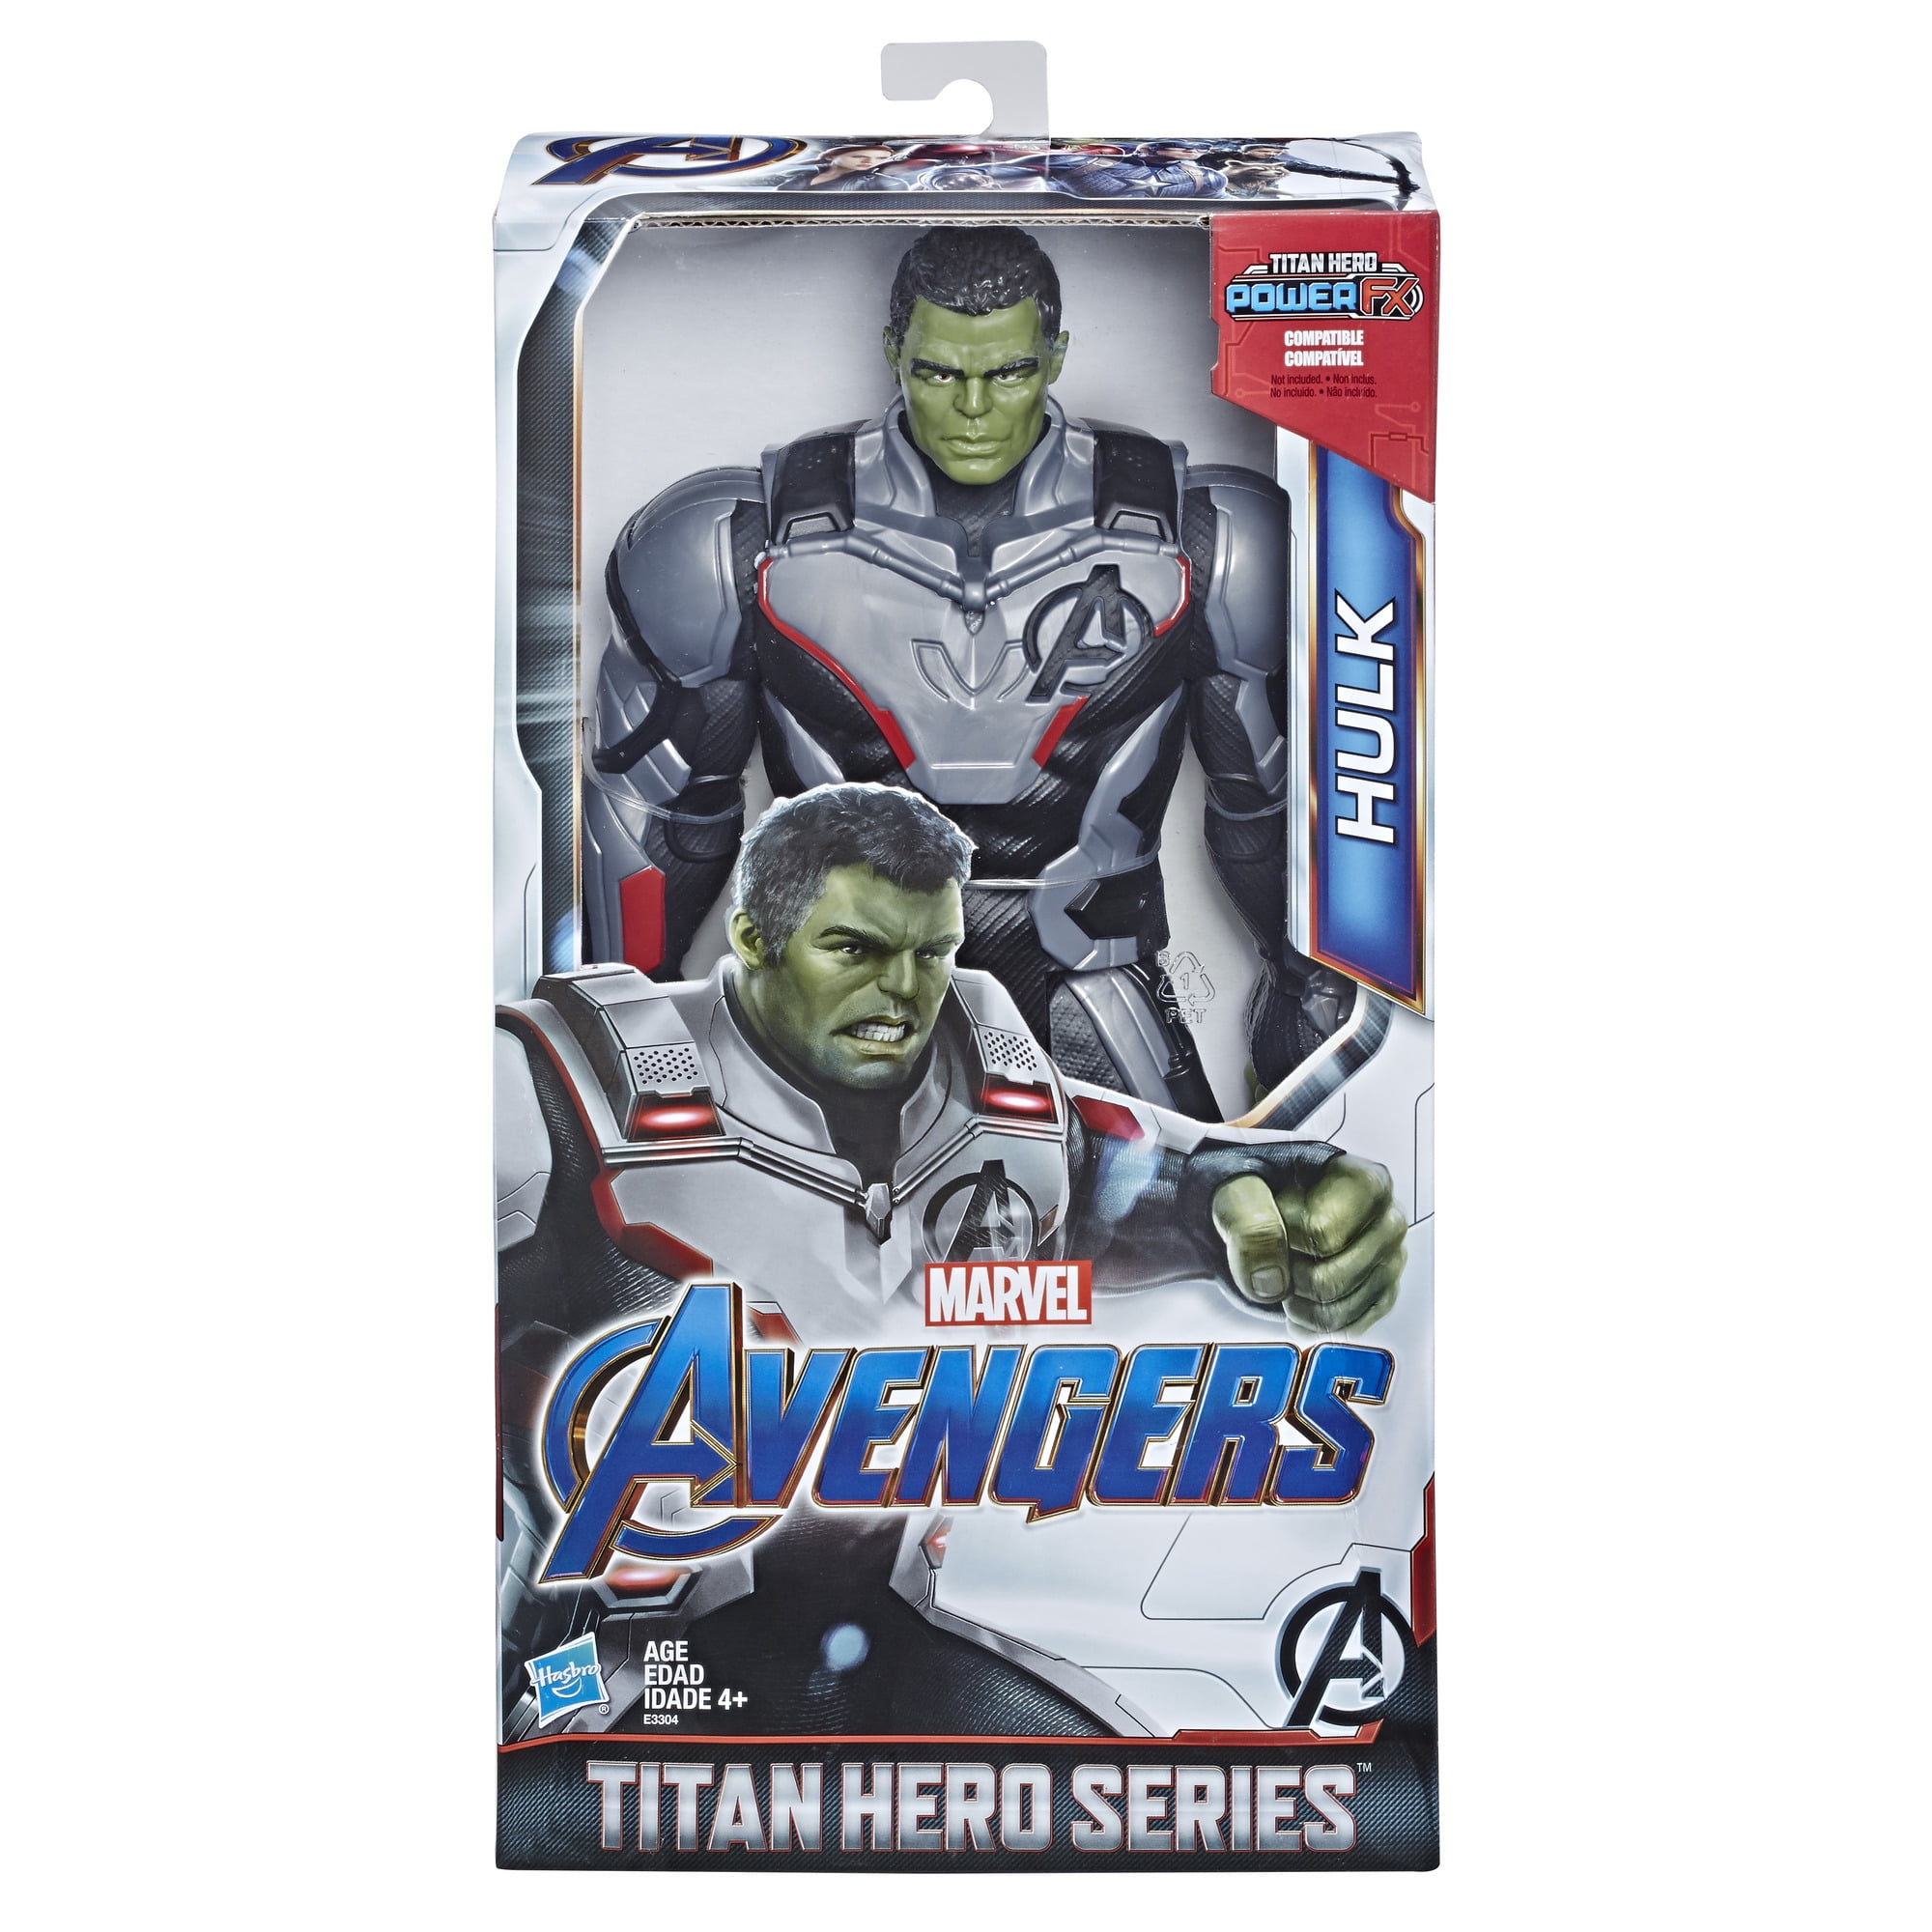 Super Heroes Avengers Action Figures Titan series kids Toys,Models,Cake Toppers 